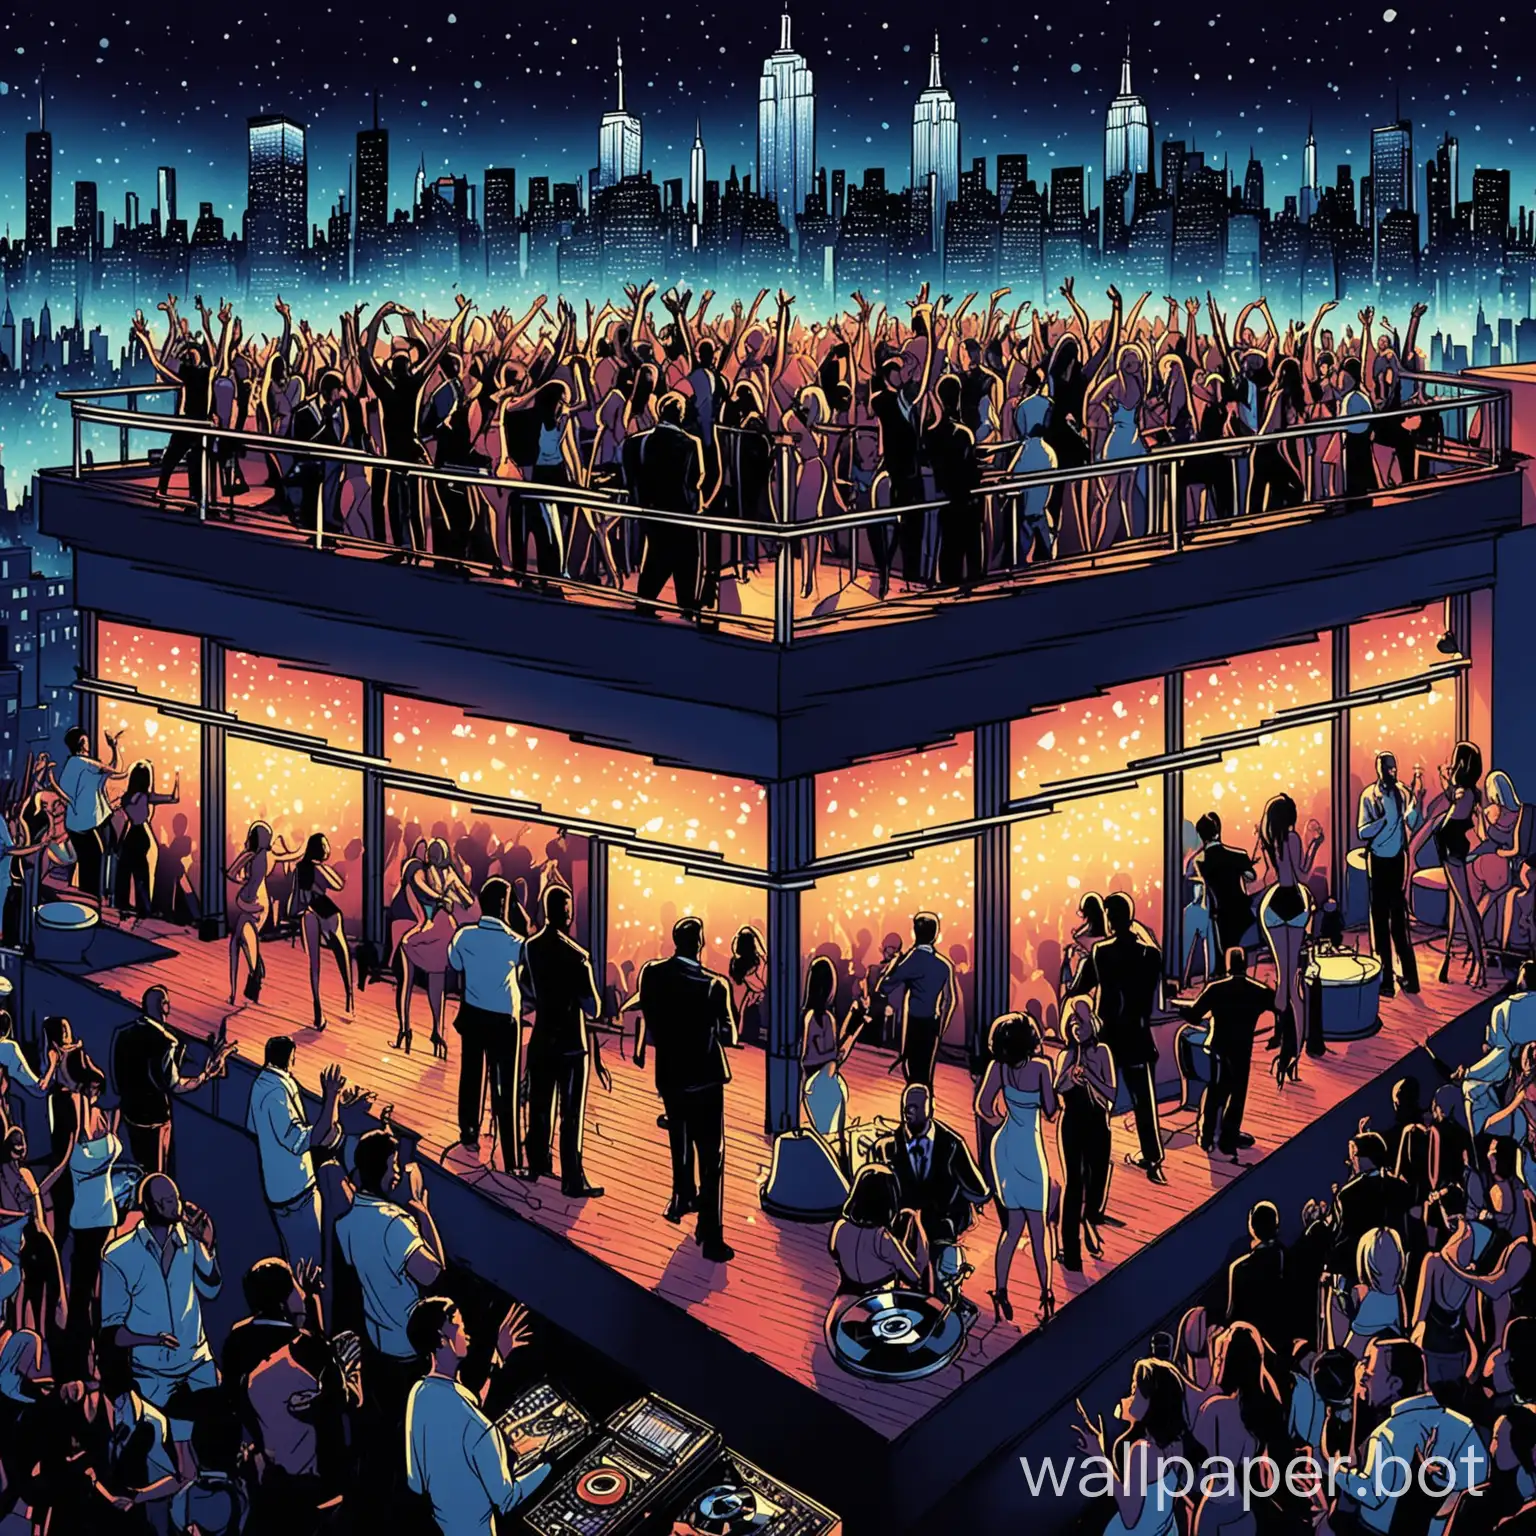 Create a New York Night club with a busy crowd on a Roof Top with House music - illustration